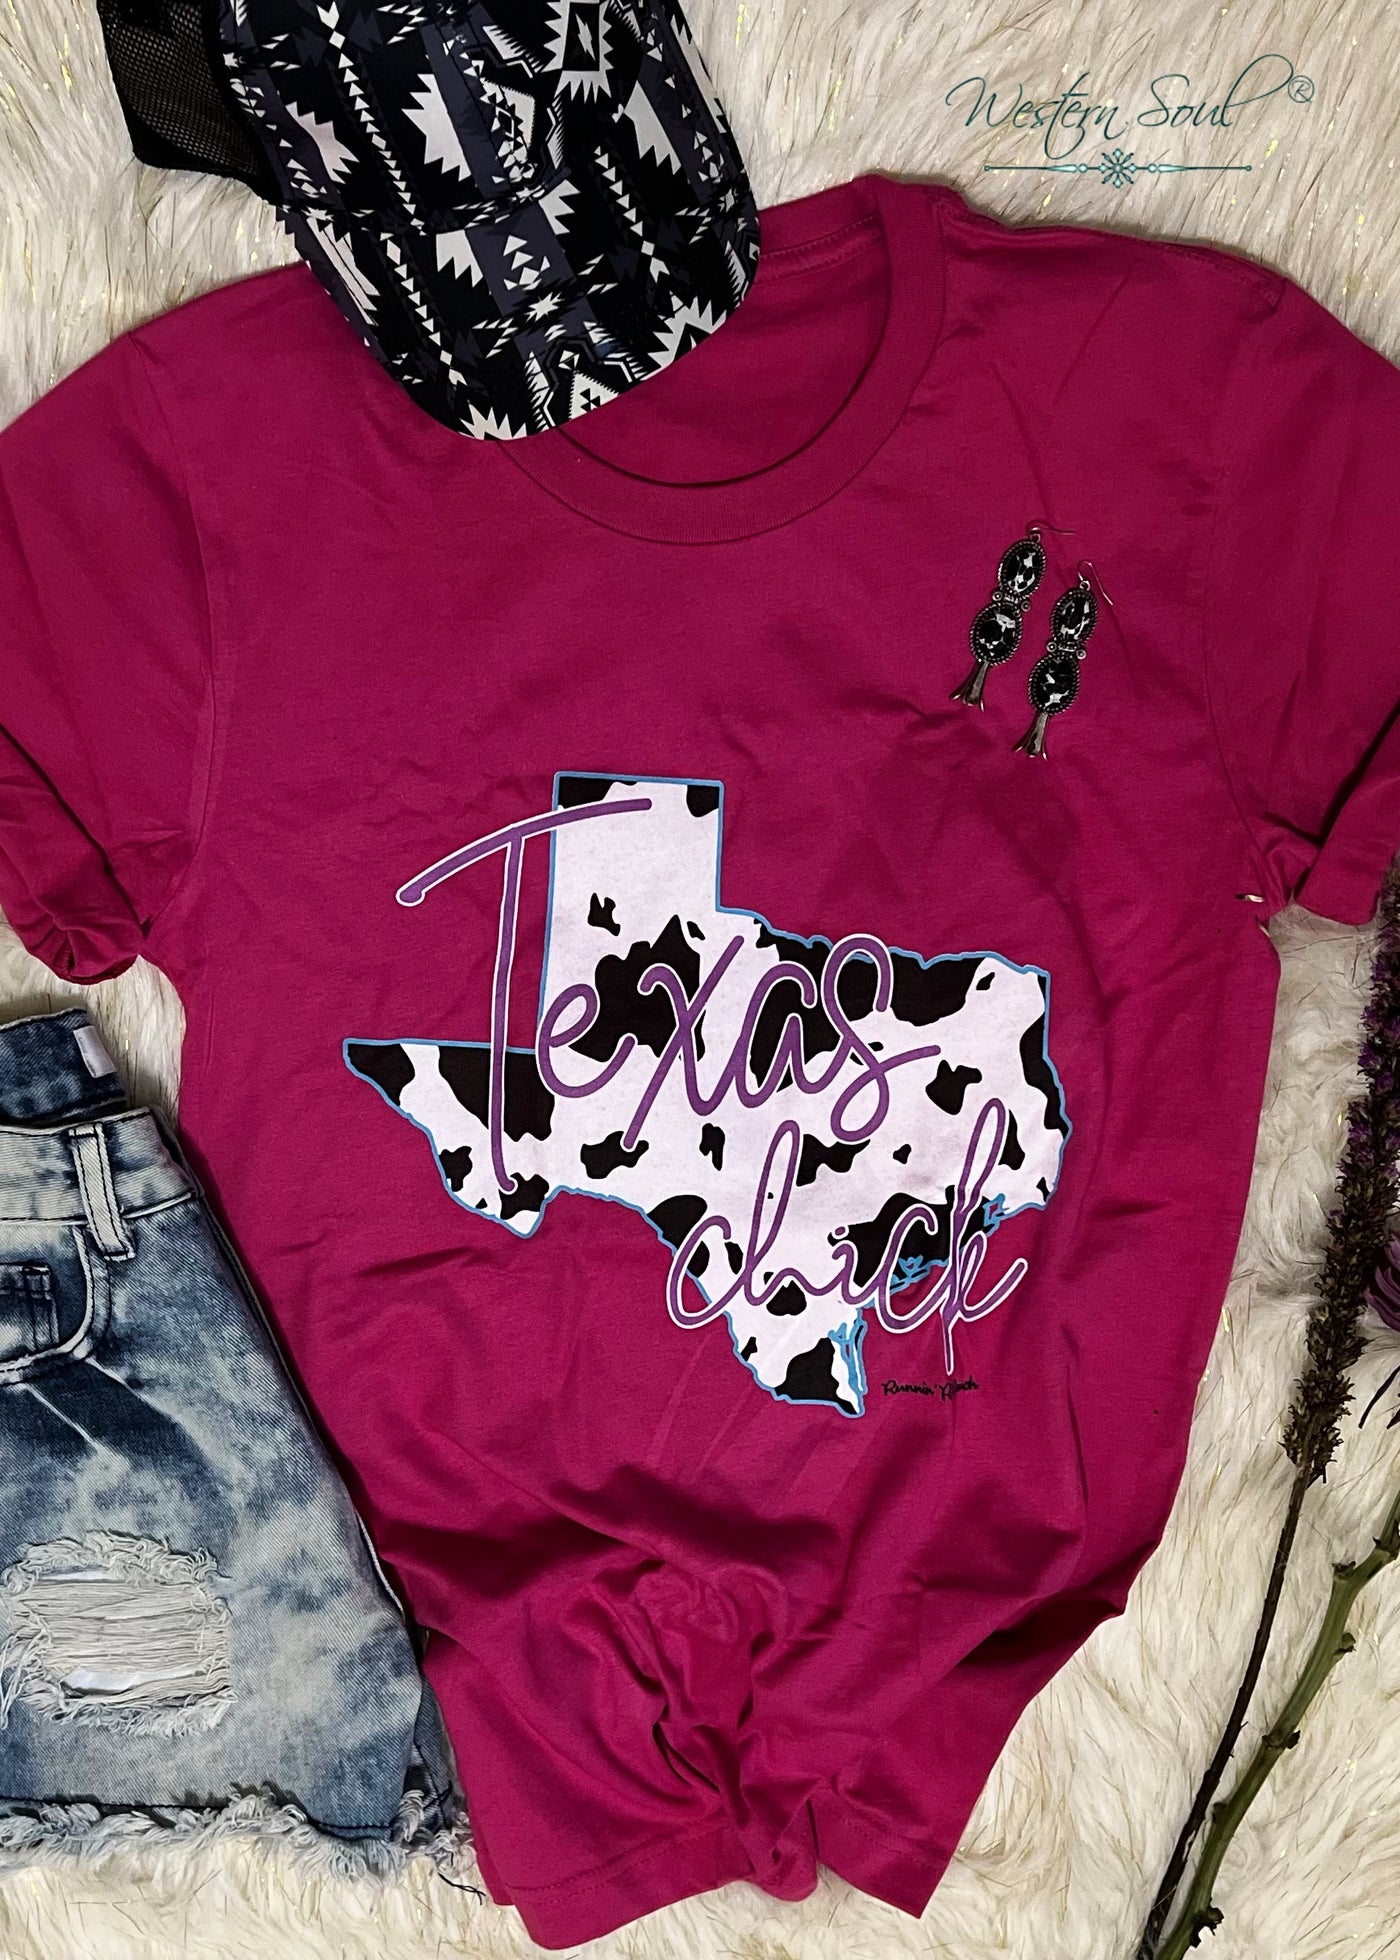 graphic tee  Texas Chick Tee from Running R Ranch